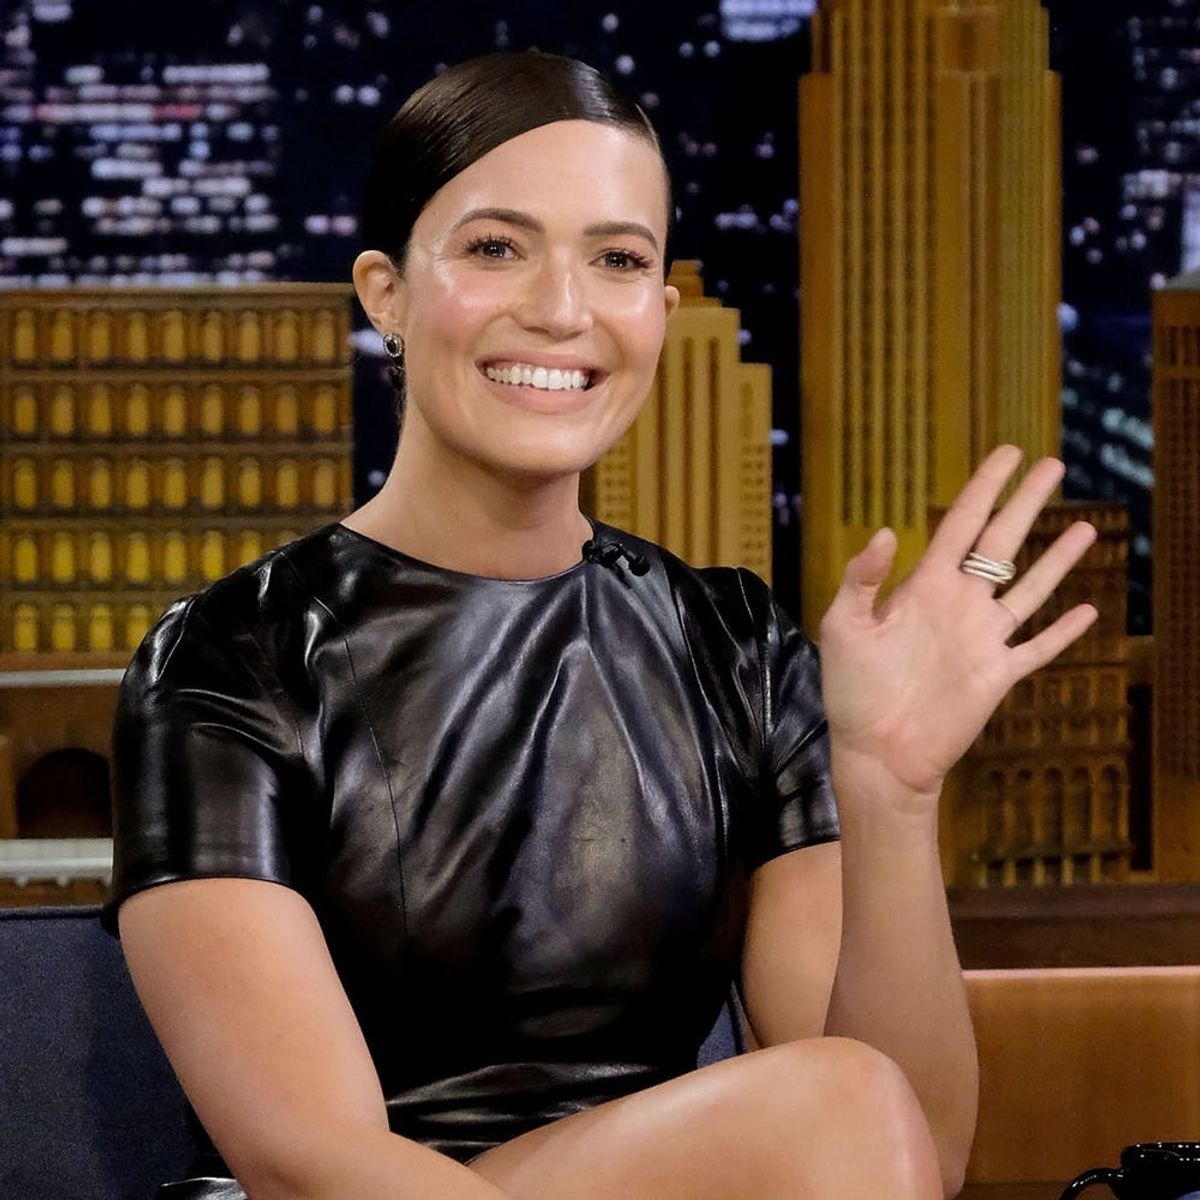 Mandy Moore Aced Jimmy Fallon’s ‘This Is Us’ or ‘A Walk to Remember’ Quiz